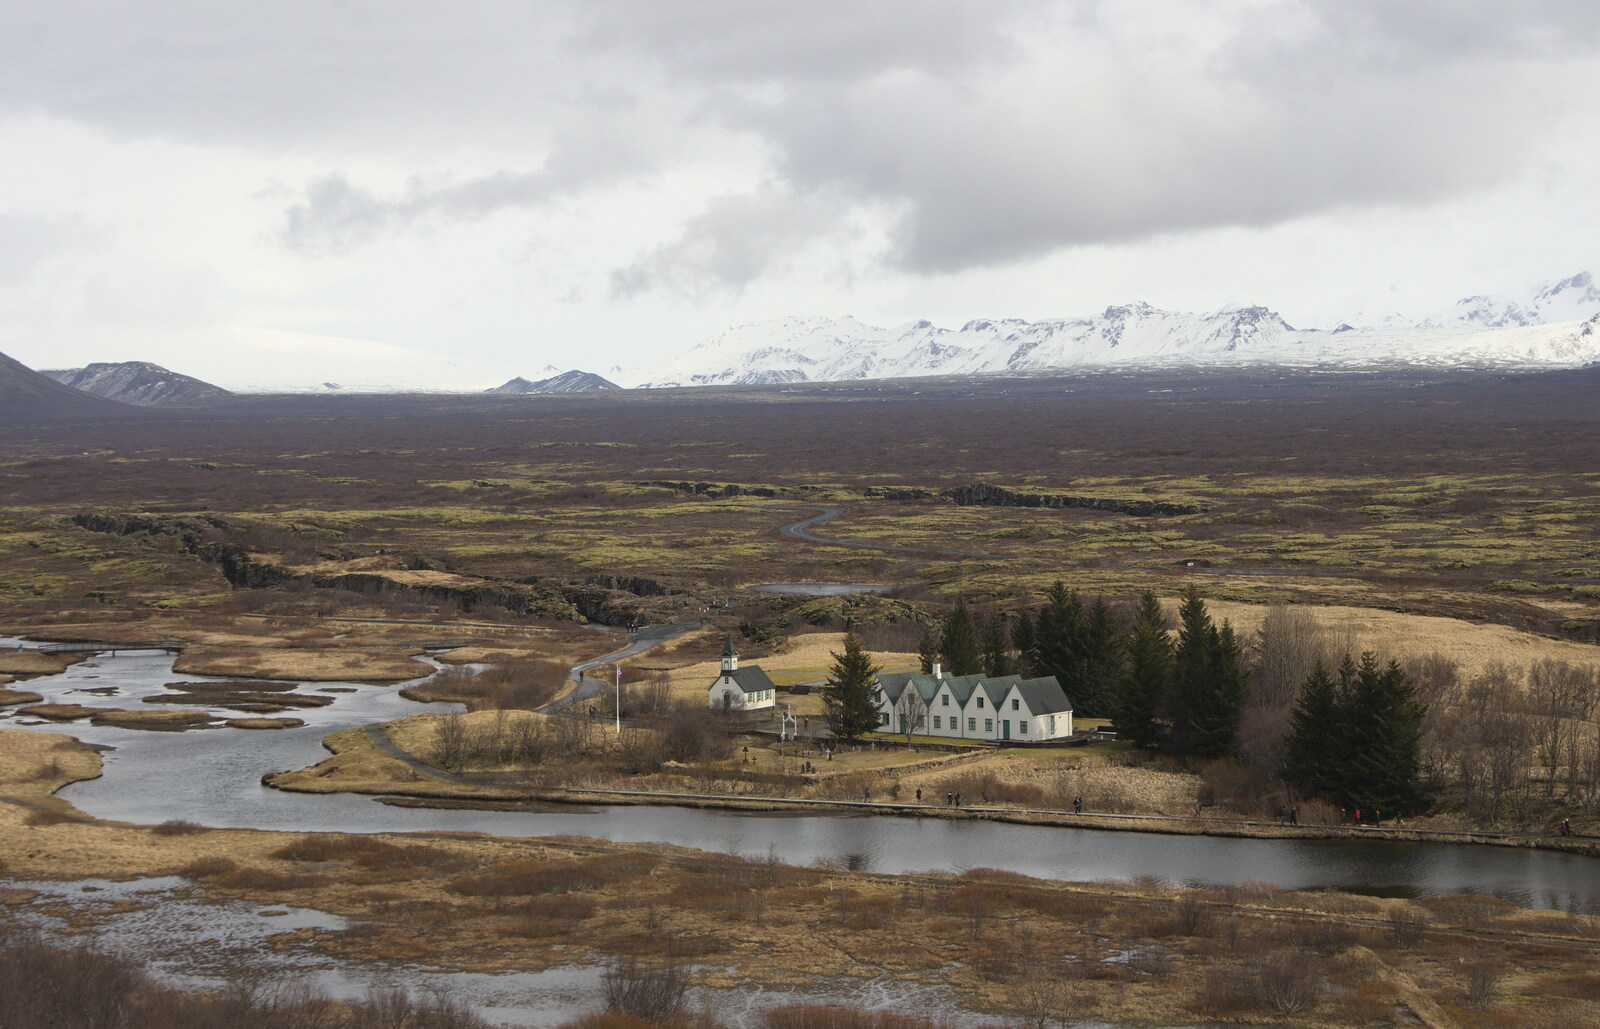 A church and houses by the river from The Golden Circle of Ísland, Iceland - 22nd April 2017